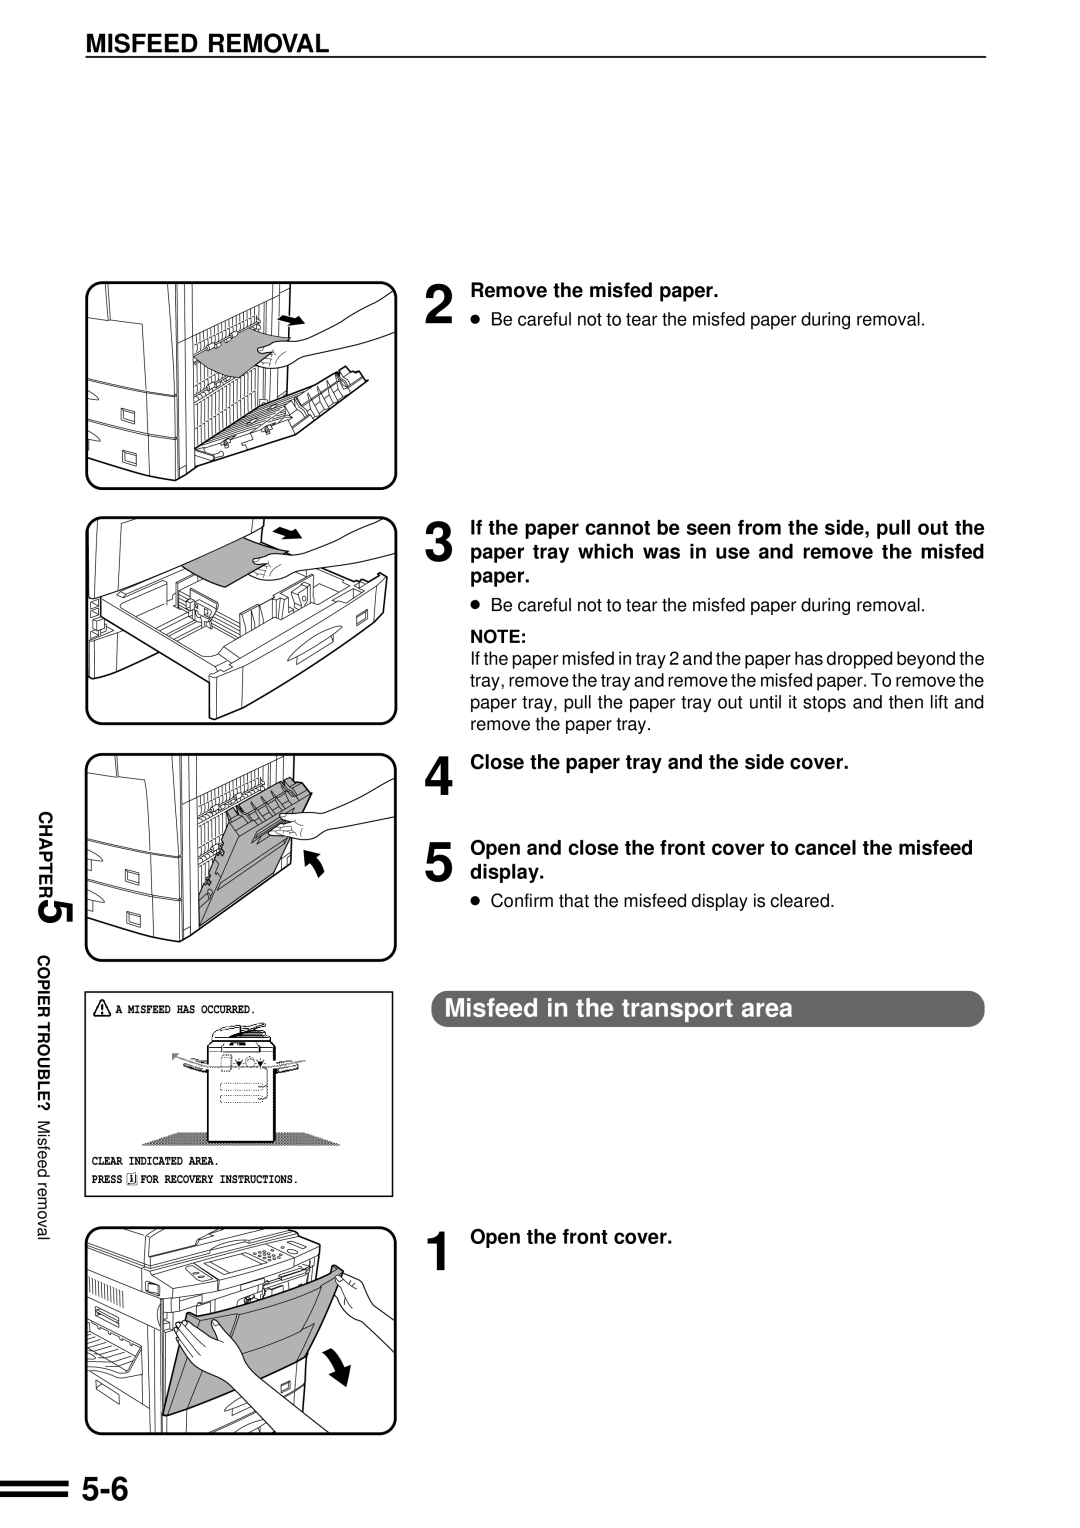 Sharp AR-507 operation manual Misfeed Removal, Misfeed in the transport area, Remove the misfed paper, Open the front cover 